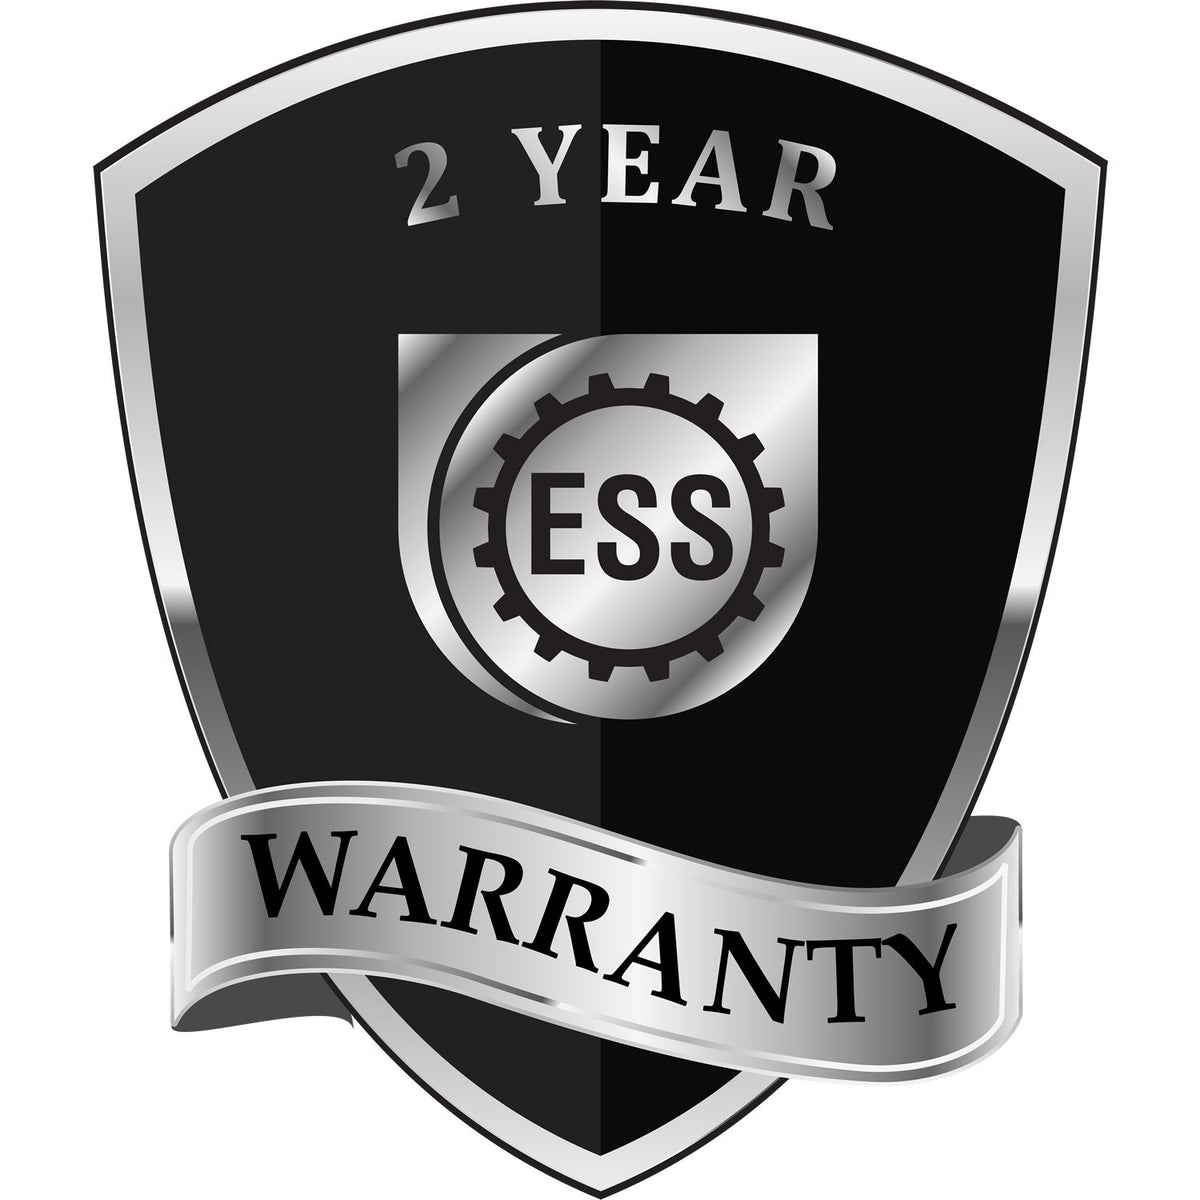 A badge or emblem showing a warranty icon for the Soft West Virginia Professional Engineer Seal